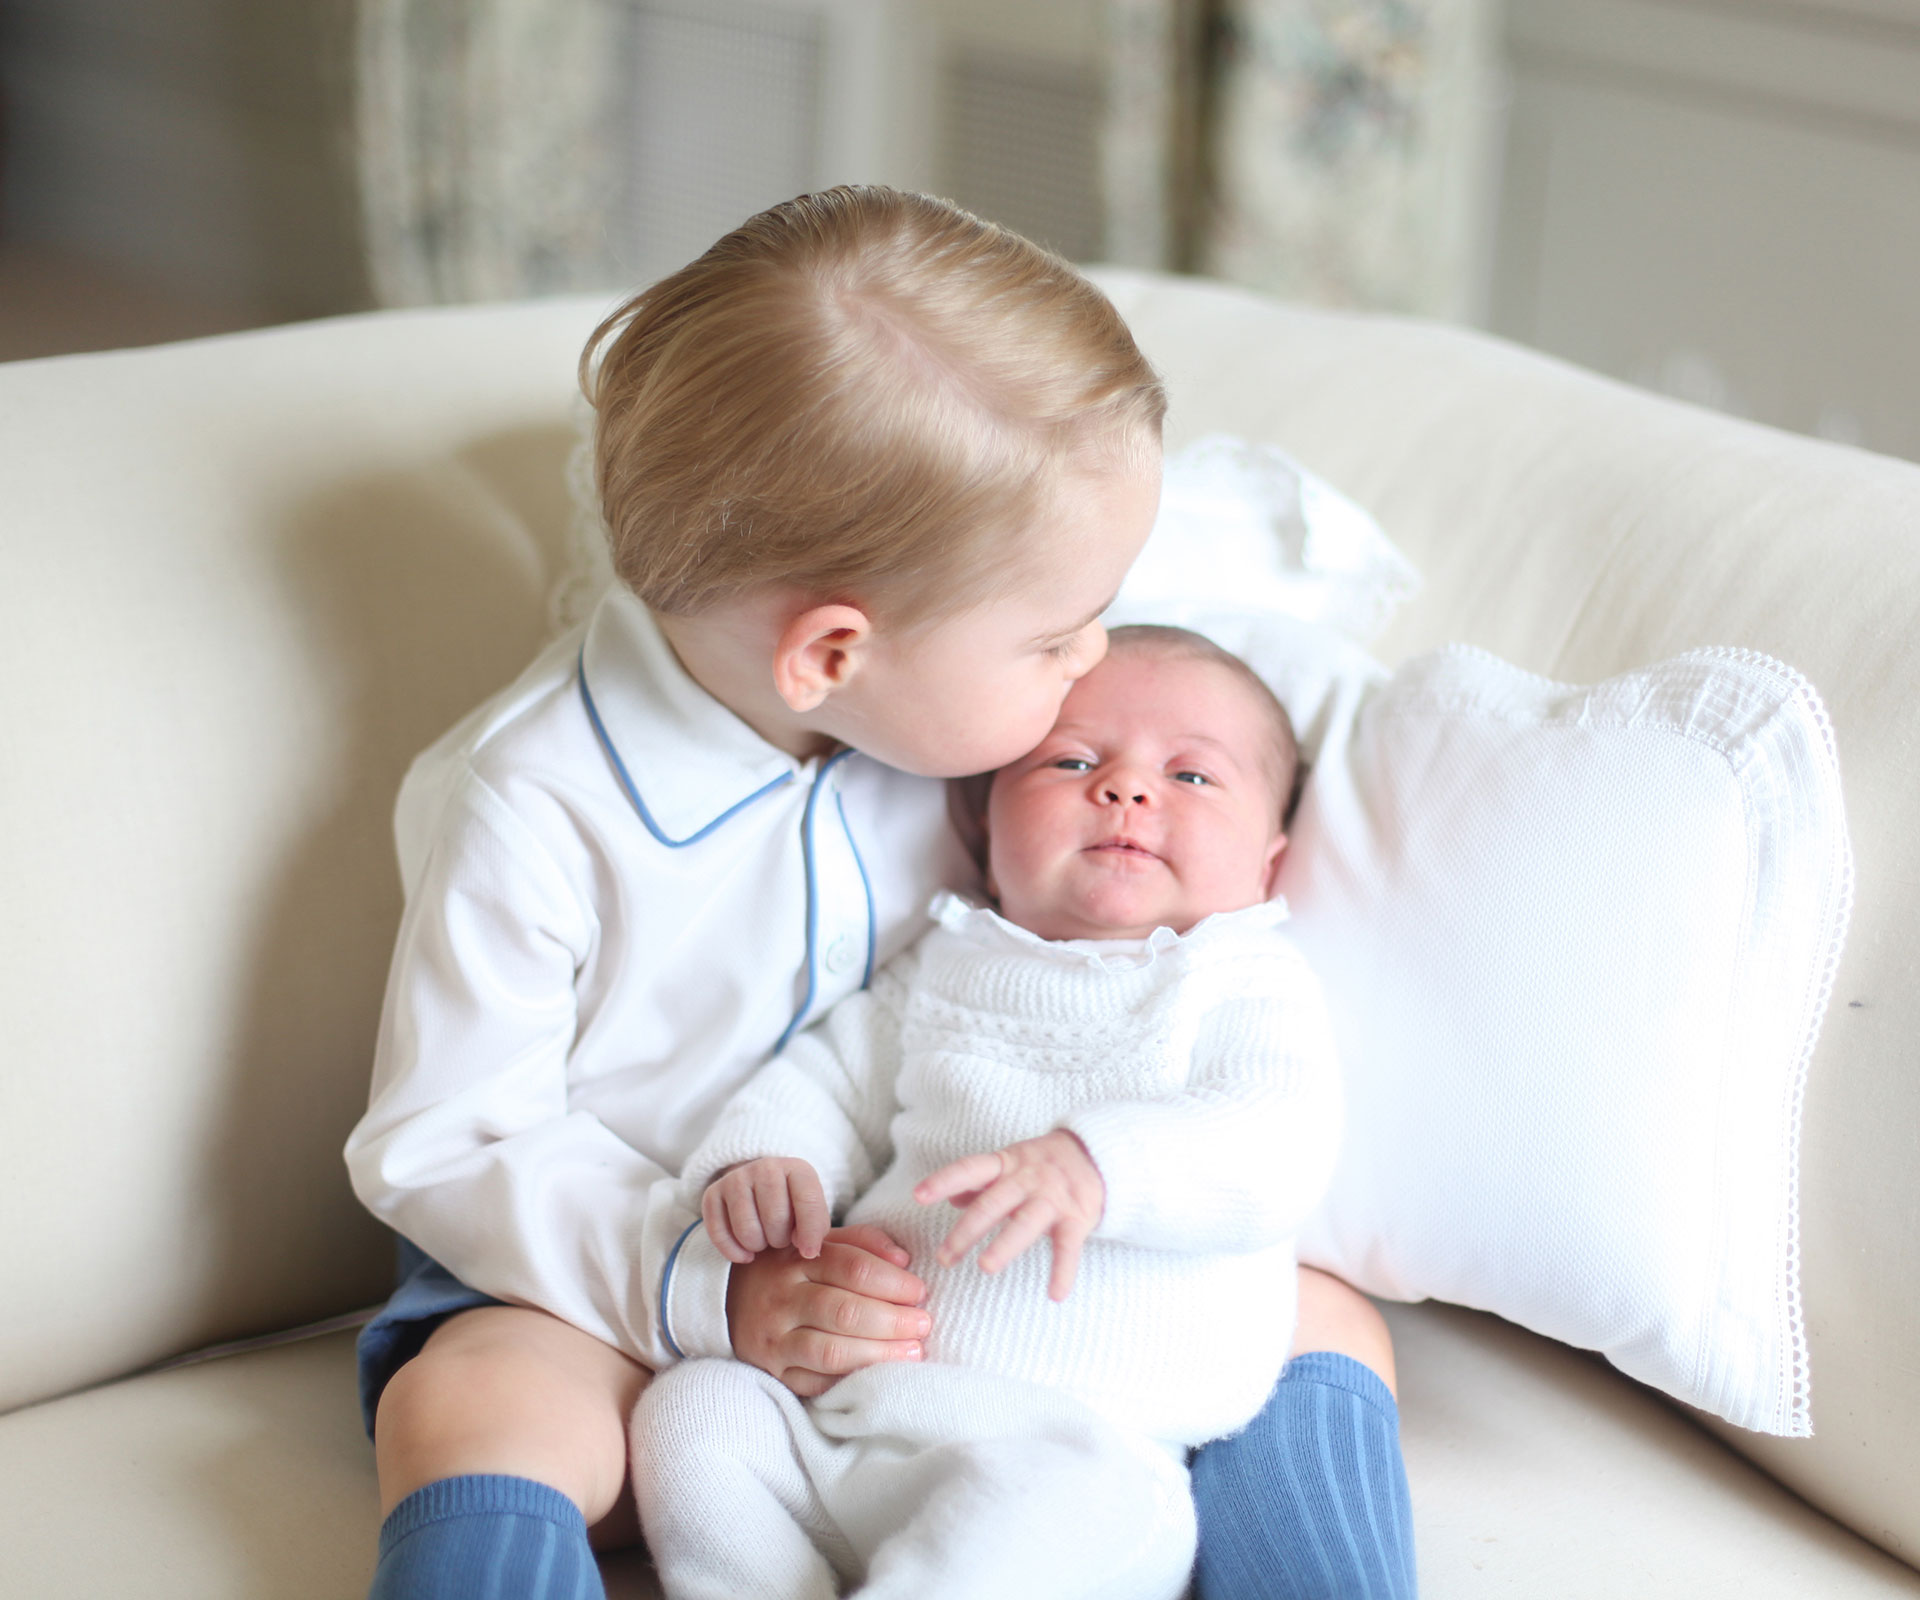 Princess Charlotte and Prince George taken by their mum Duchess of Cambridge